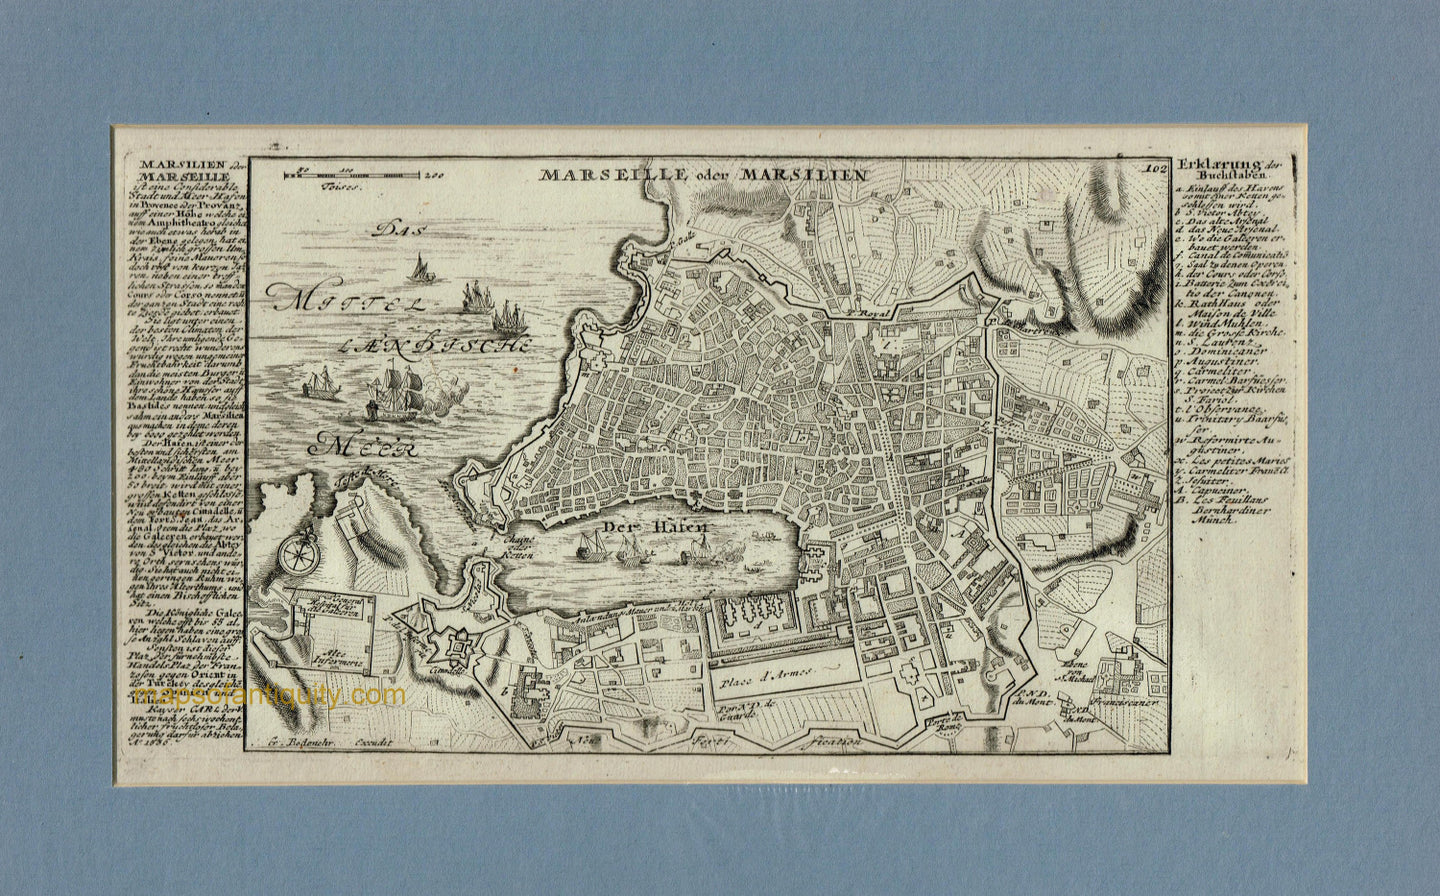 Antique-Black-and-White-Map-Marseille-oder-Marsilien-Europe-France-c.-1700-Bodenehr-Maps-Of-Antiquity